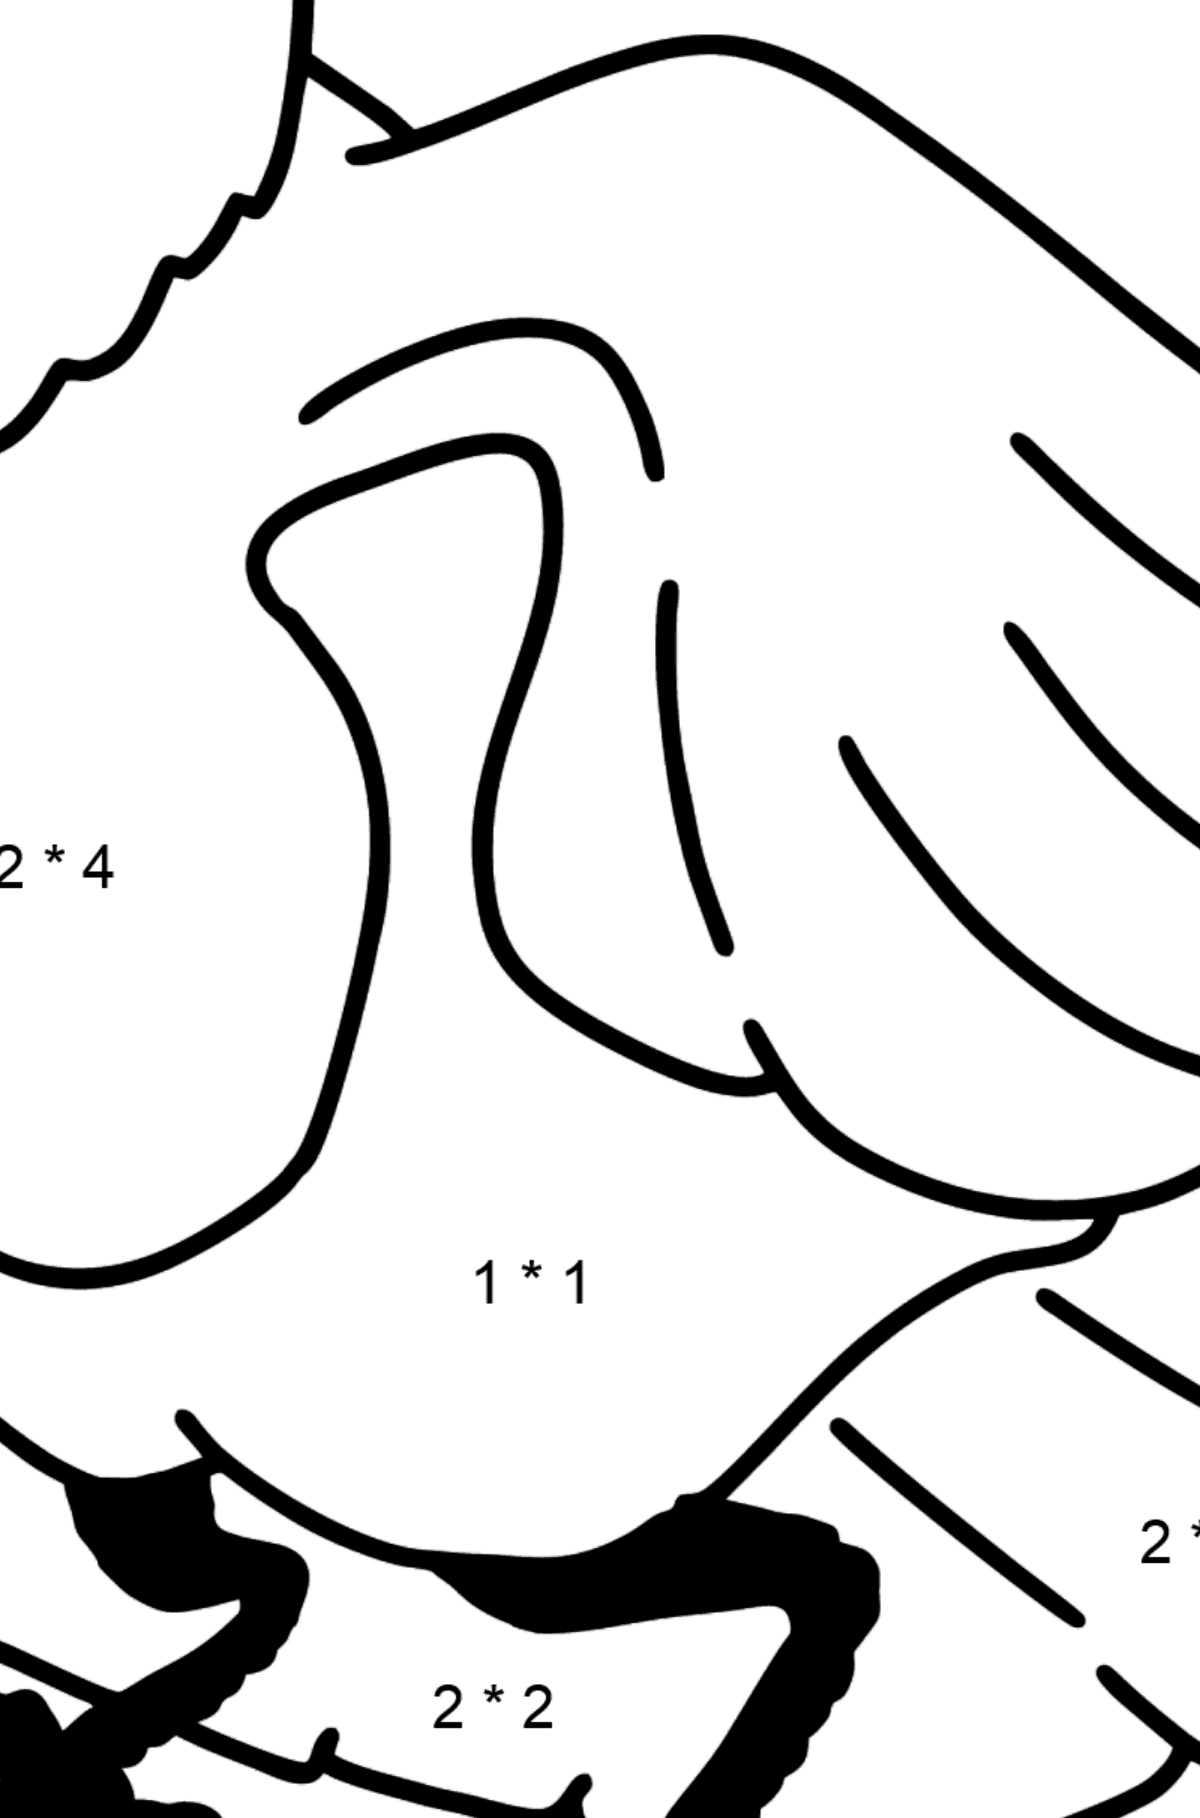 Dove coloring page - Math Coloring - Multiplication for Kids